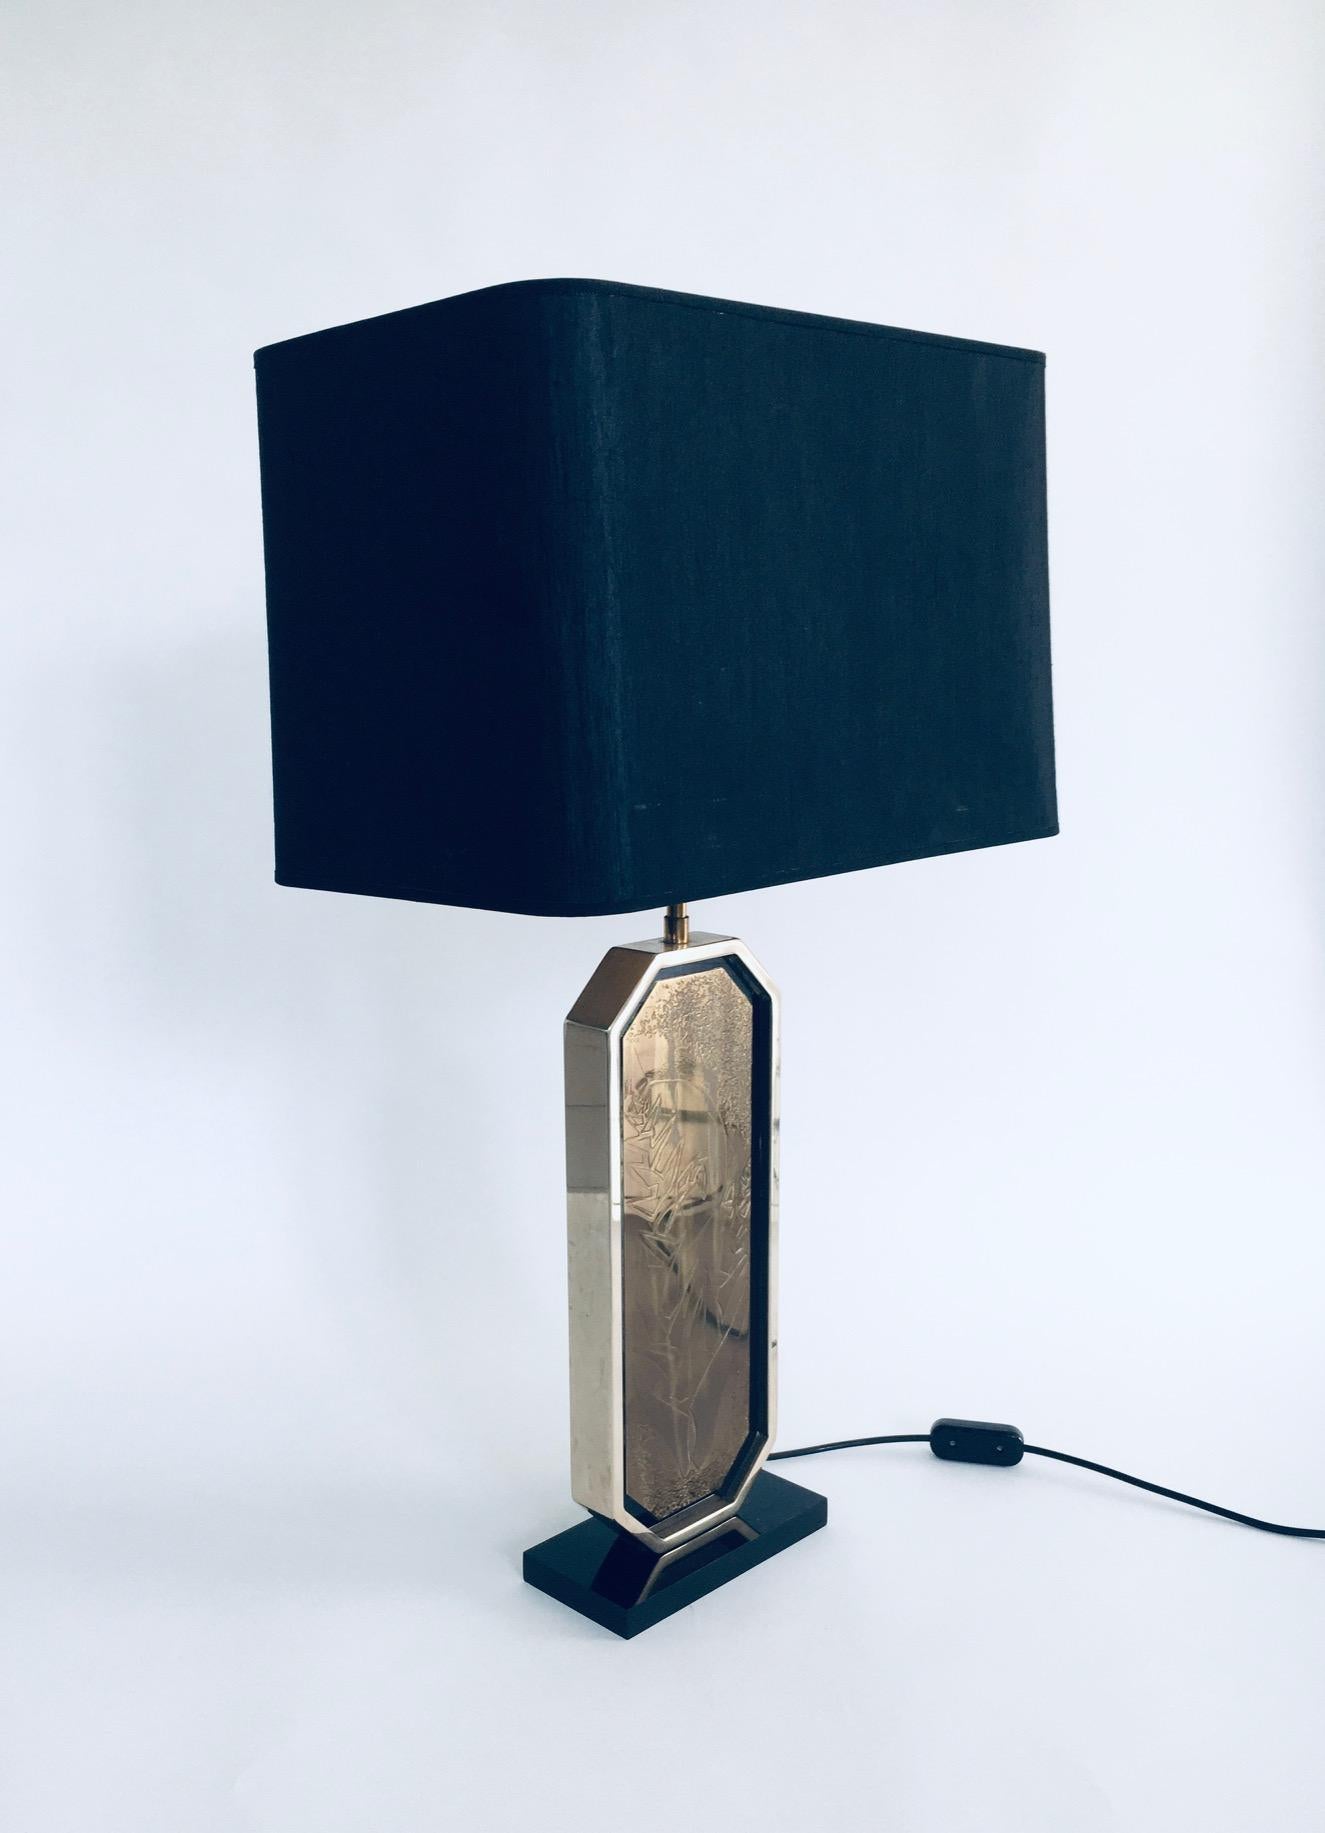 Late 20th Century Brass Etched Maho Table Lamp by George Mathias for M2000, Belgium 1970's